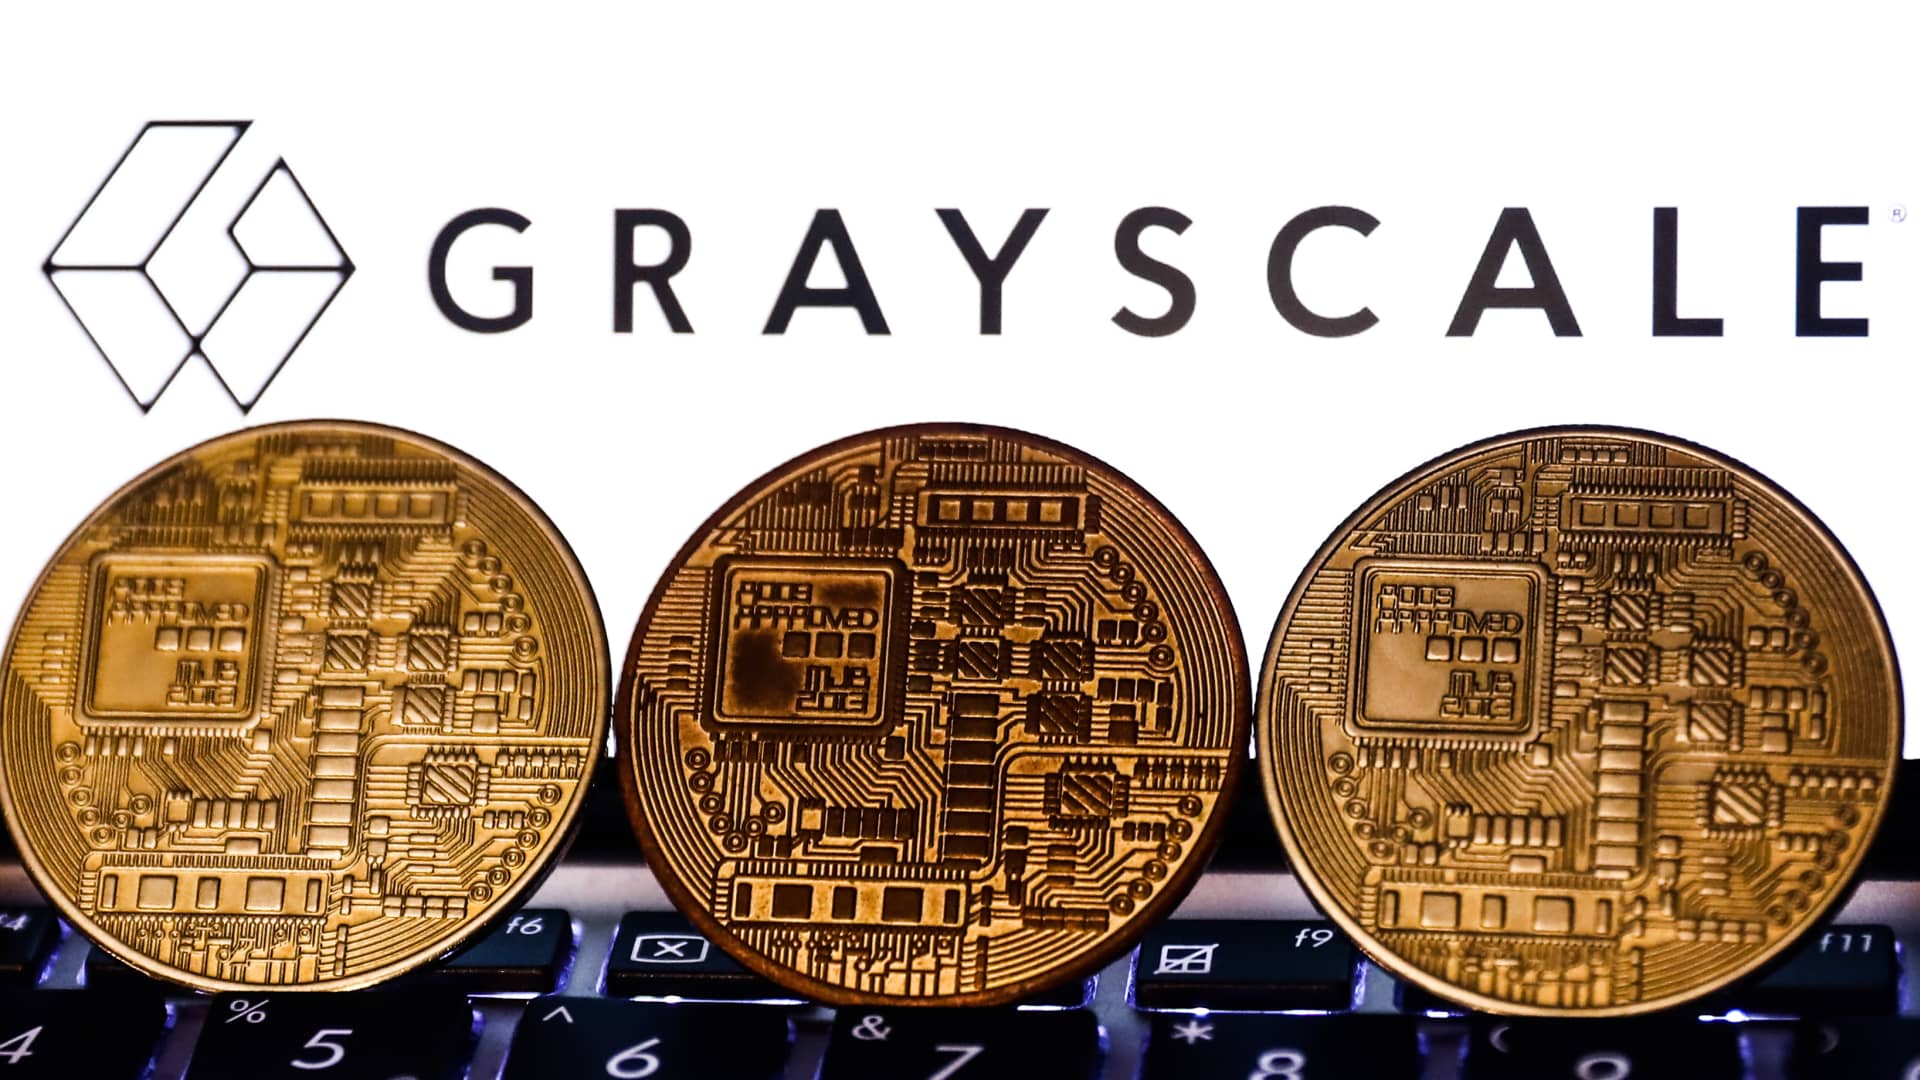 Grayscale won’t share proof of reserves due to ‘security concerns’